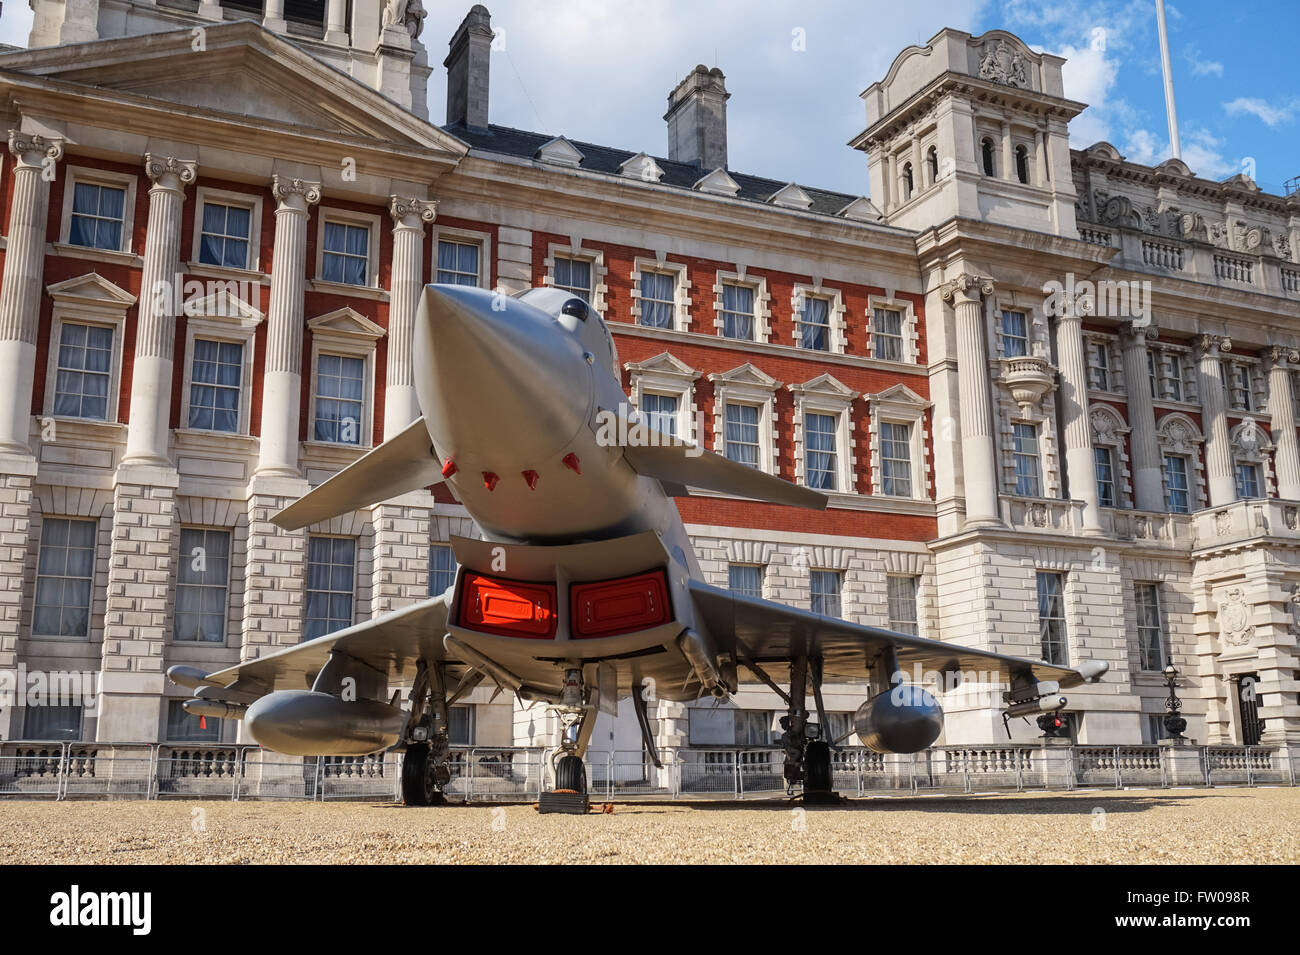 Full-size replica of a Eurofighter Typhoon exhibited at Horse Guards Parade in London to mark the 100th anniversary of the RAF, London England United Kingdom UK Stock Photo